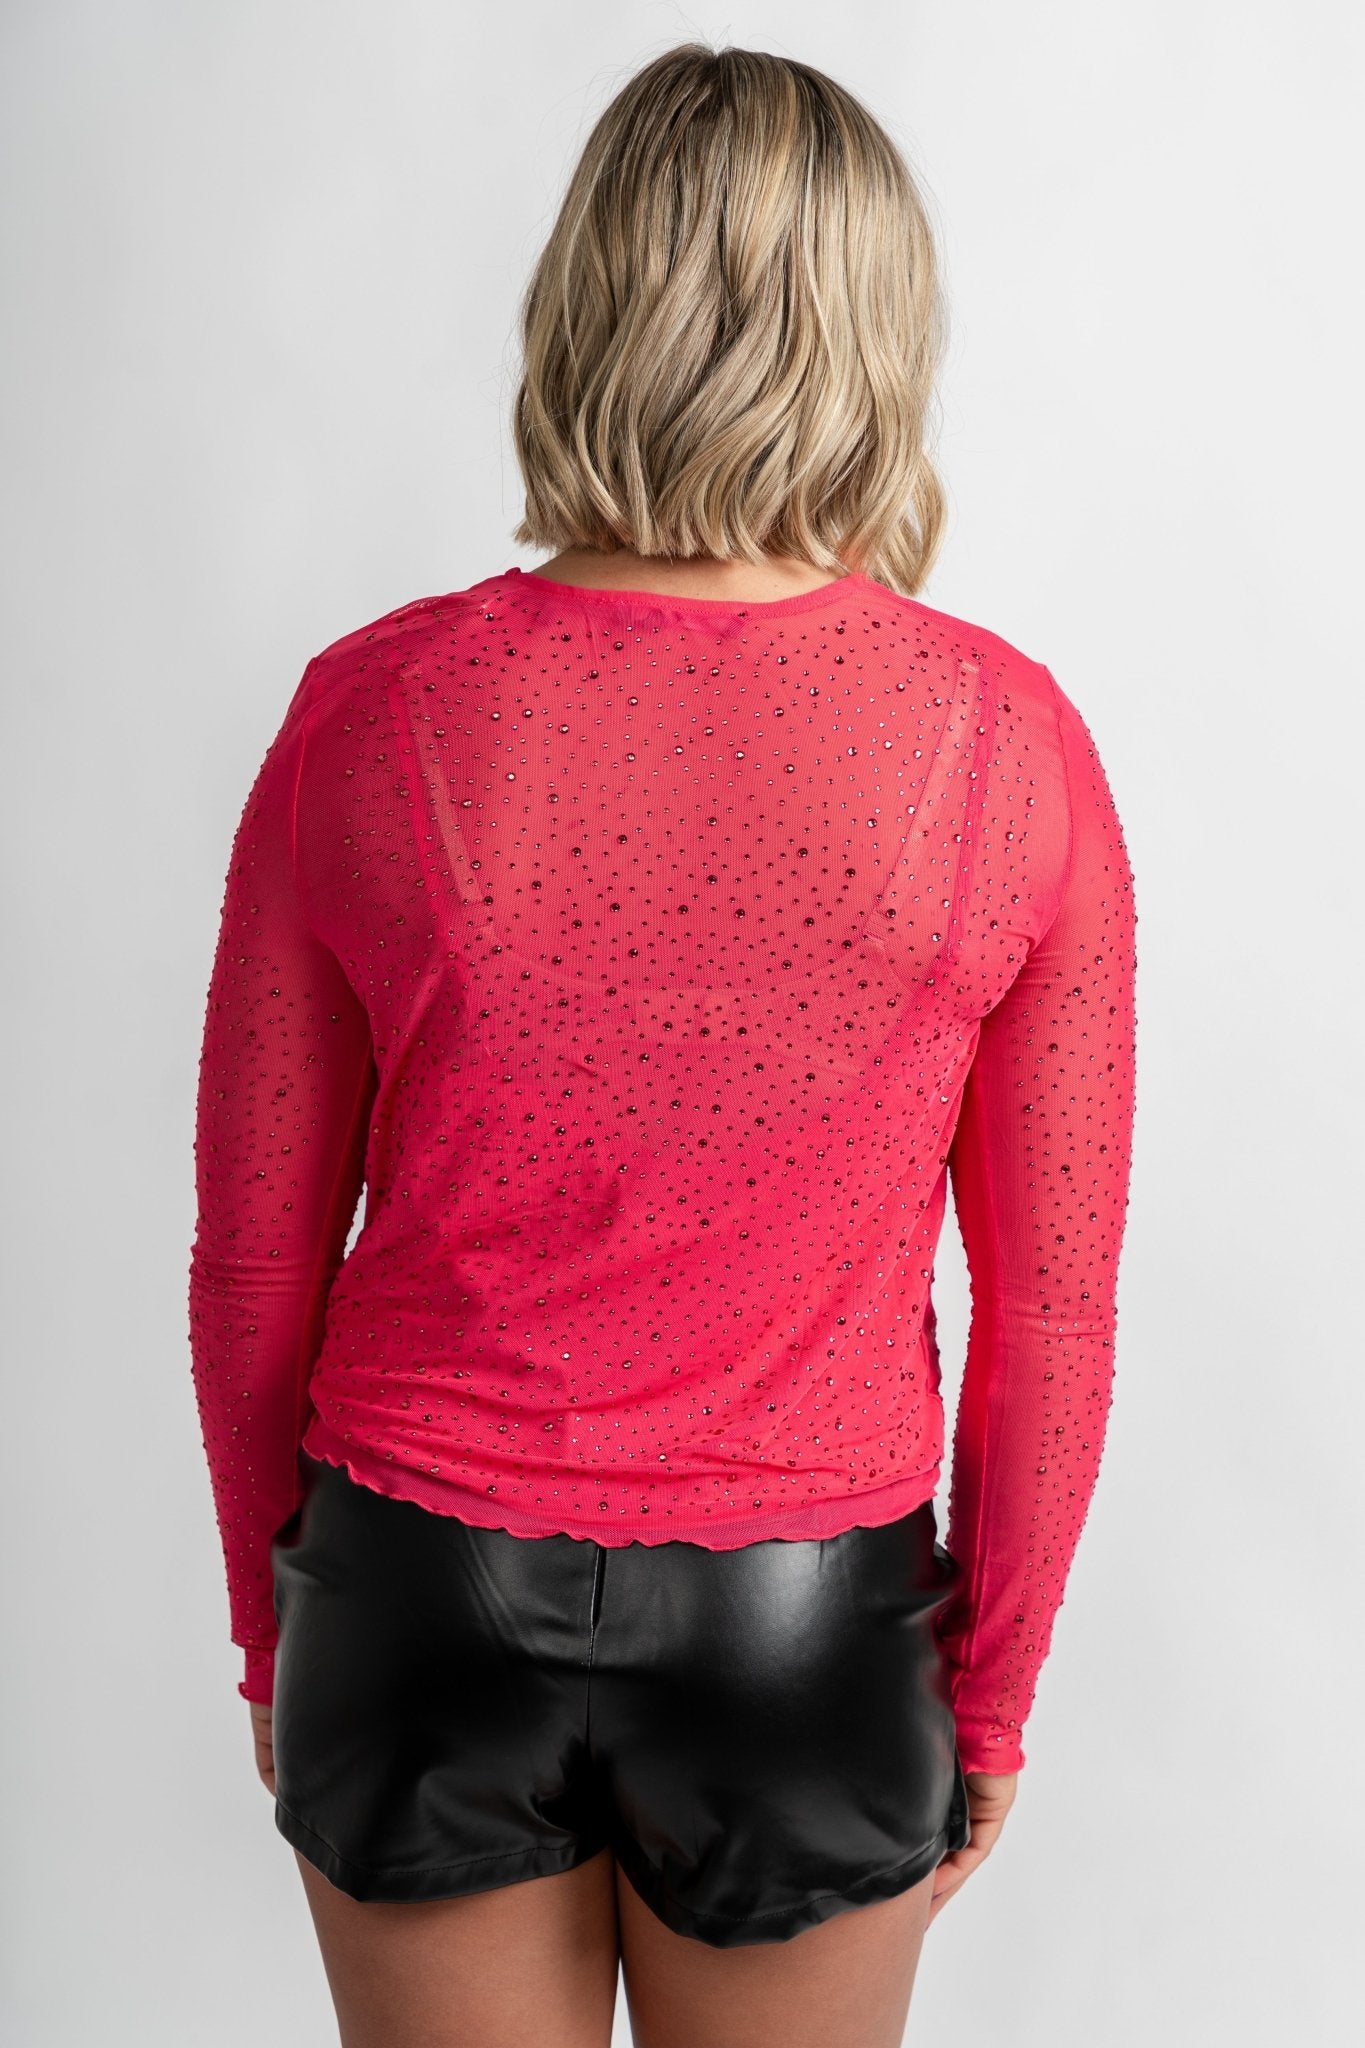 Rhinestone mesh long sleeve top cabernet pink - Unique Valentine's Day T-Shirt Designs at Lush Fashion Lounge Boutique in Oklahoma City